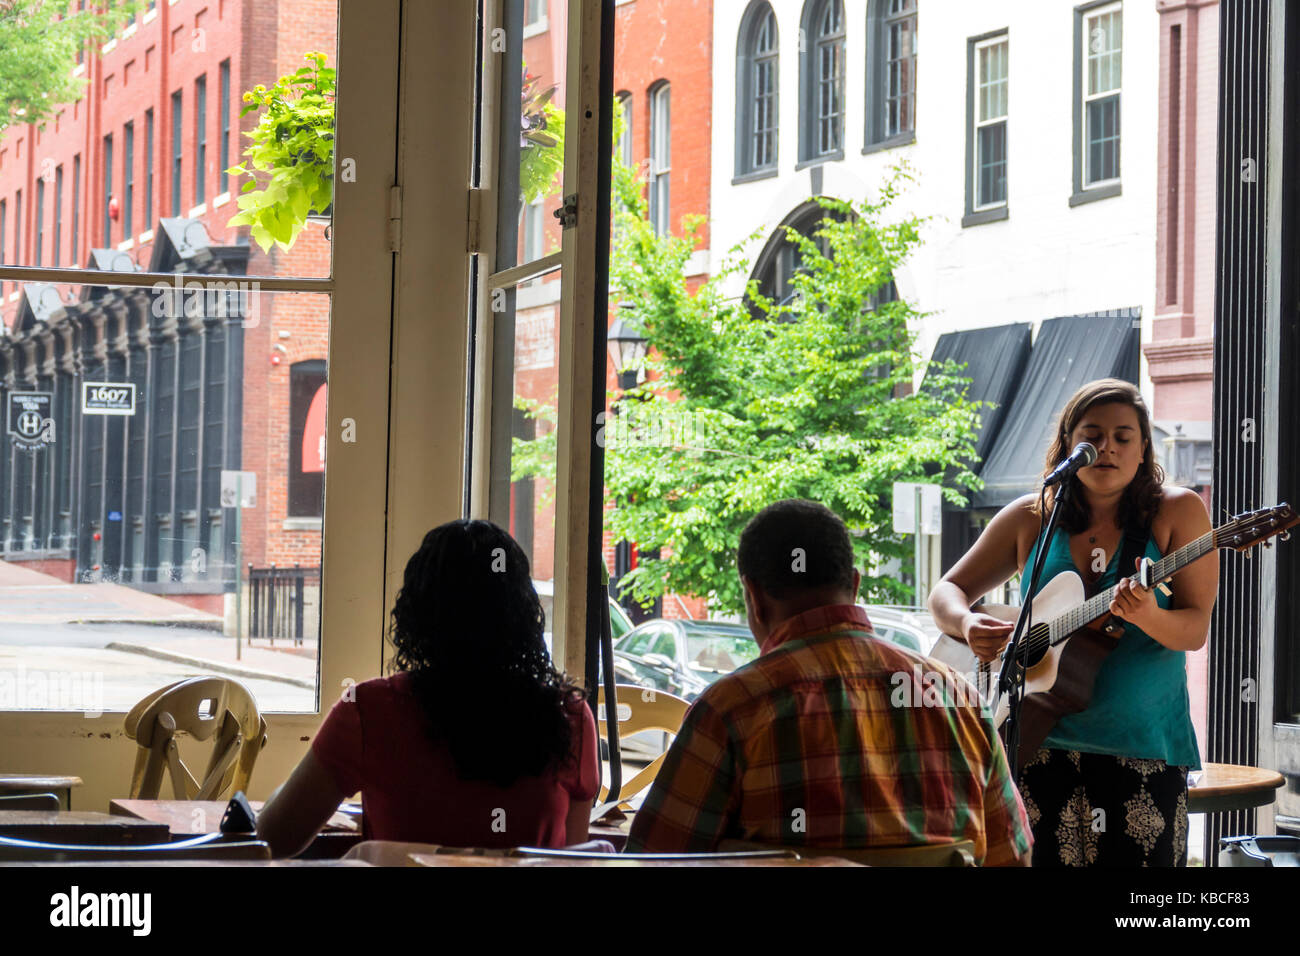 Richmond Virginia,Shockoe Slip district,Urban Farmhouse Market & Cafe,restaurant restaurants food dining eating out cafe cafes bistro,coffeehouse,dini Stock Photo